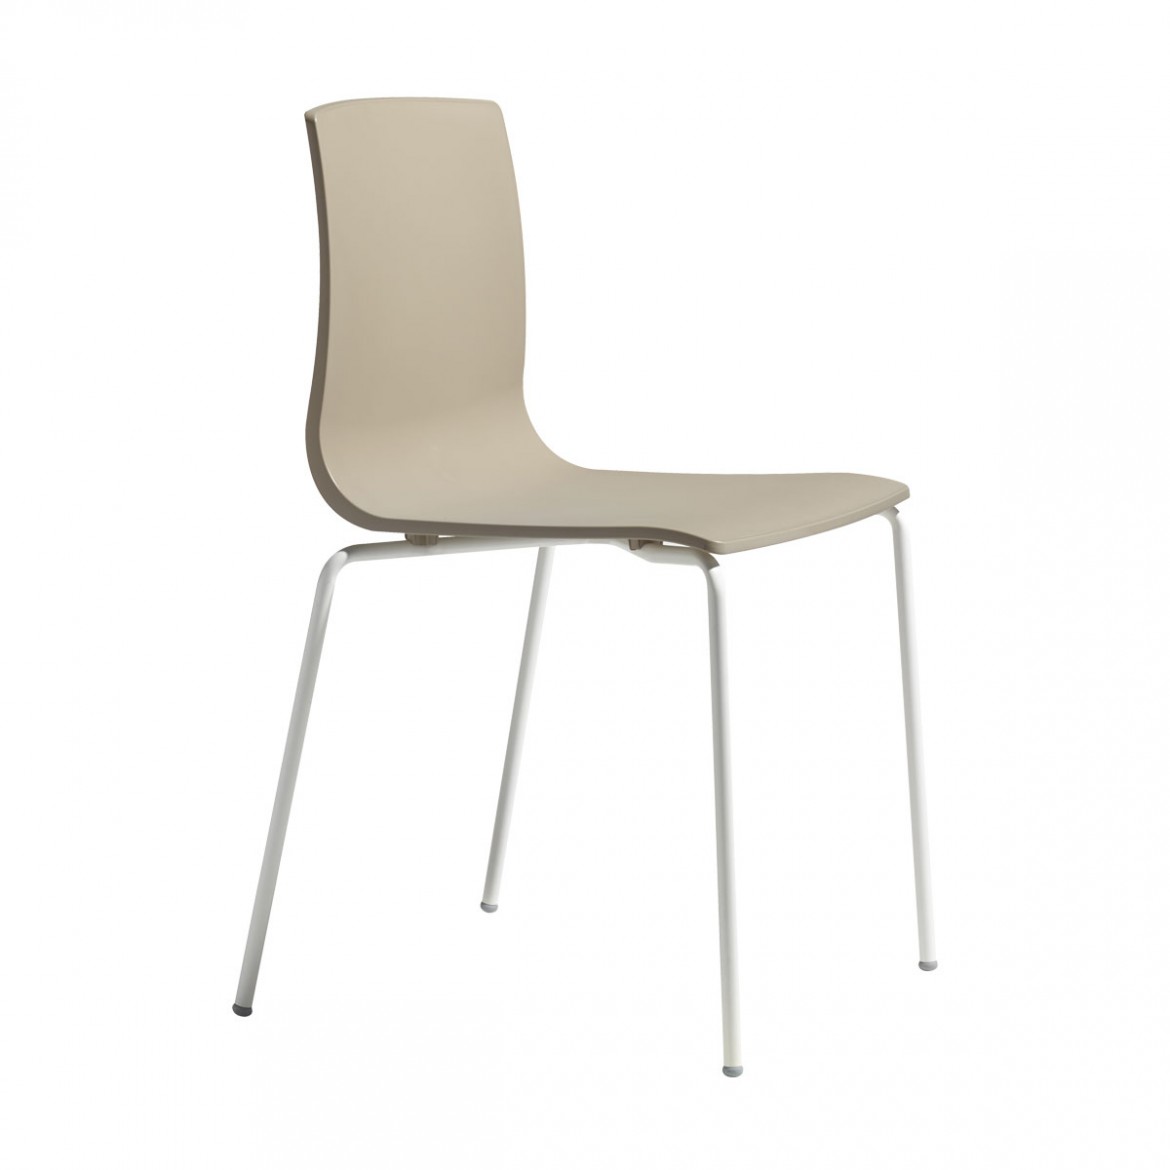 ALICE CHAIR coated frame